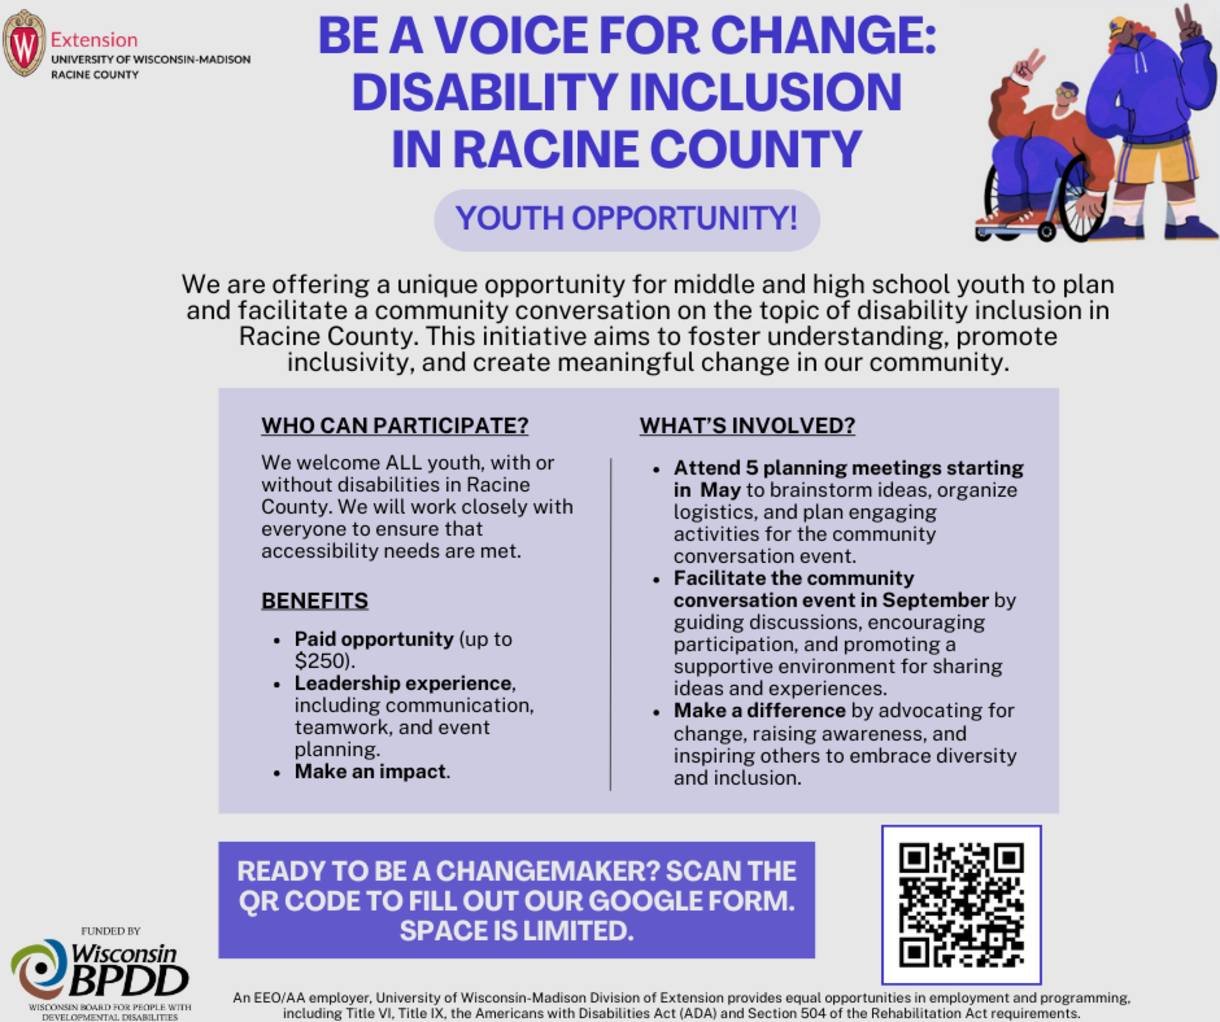 UW-Madison Extension Racine County is offering an opportunity for middle school and high school youth to plan and facilitate a community conversation on the topic of disability inclusion in Racine County! 

Participating youth will be paid a stipend 